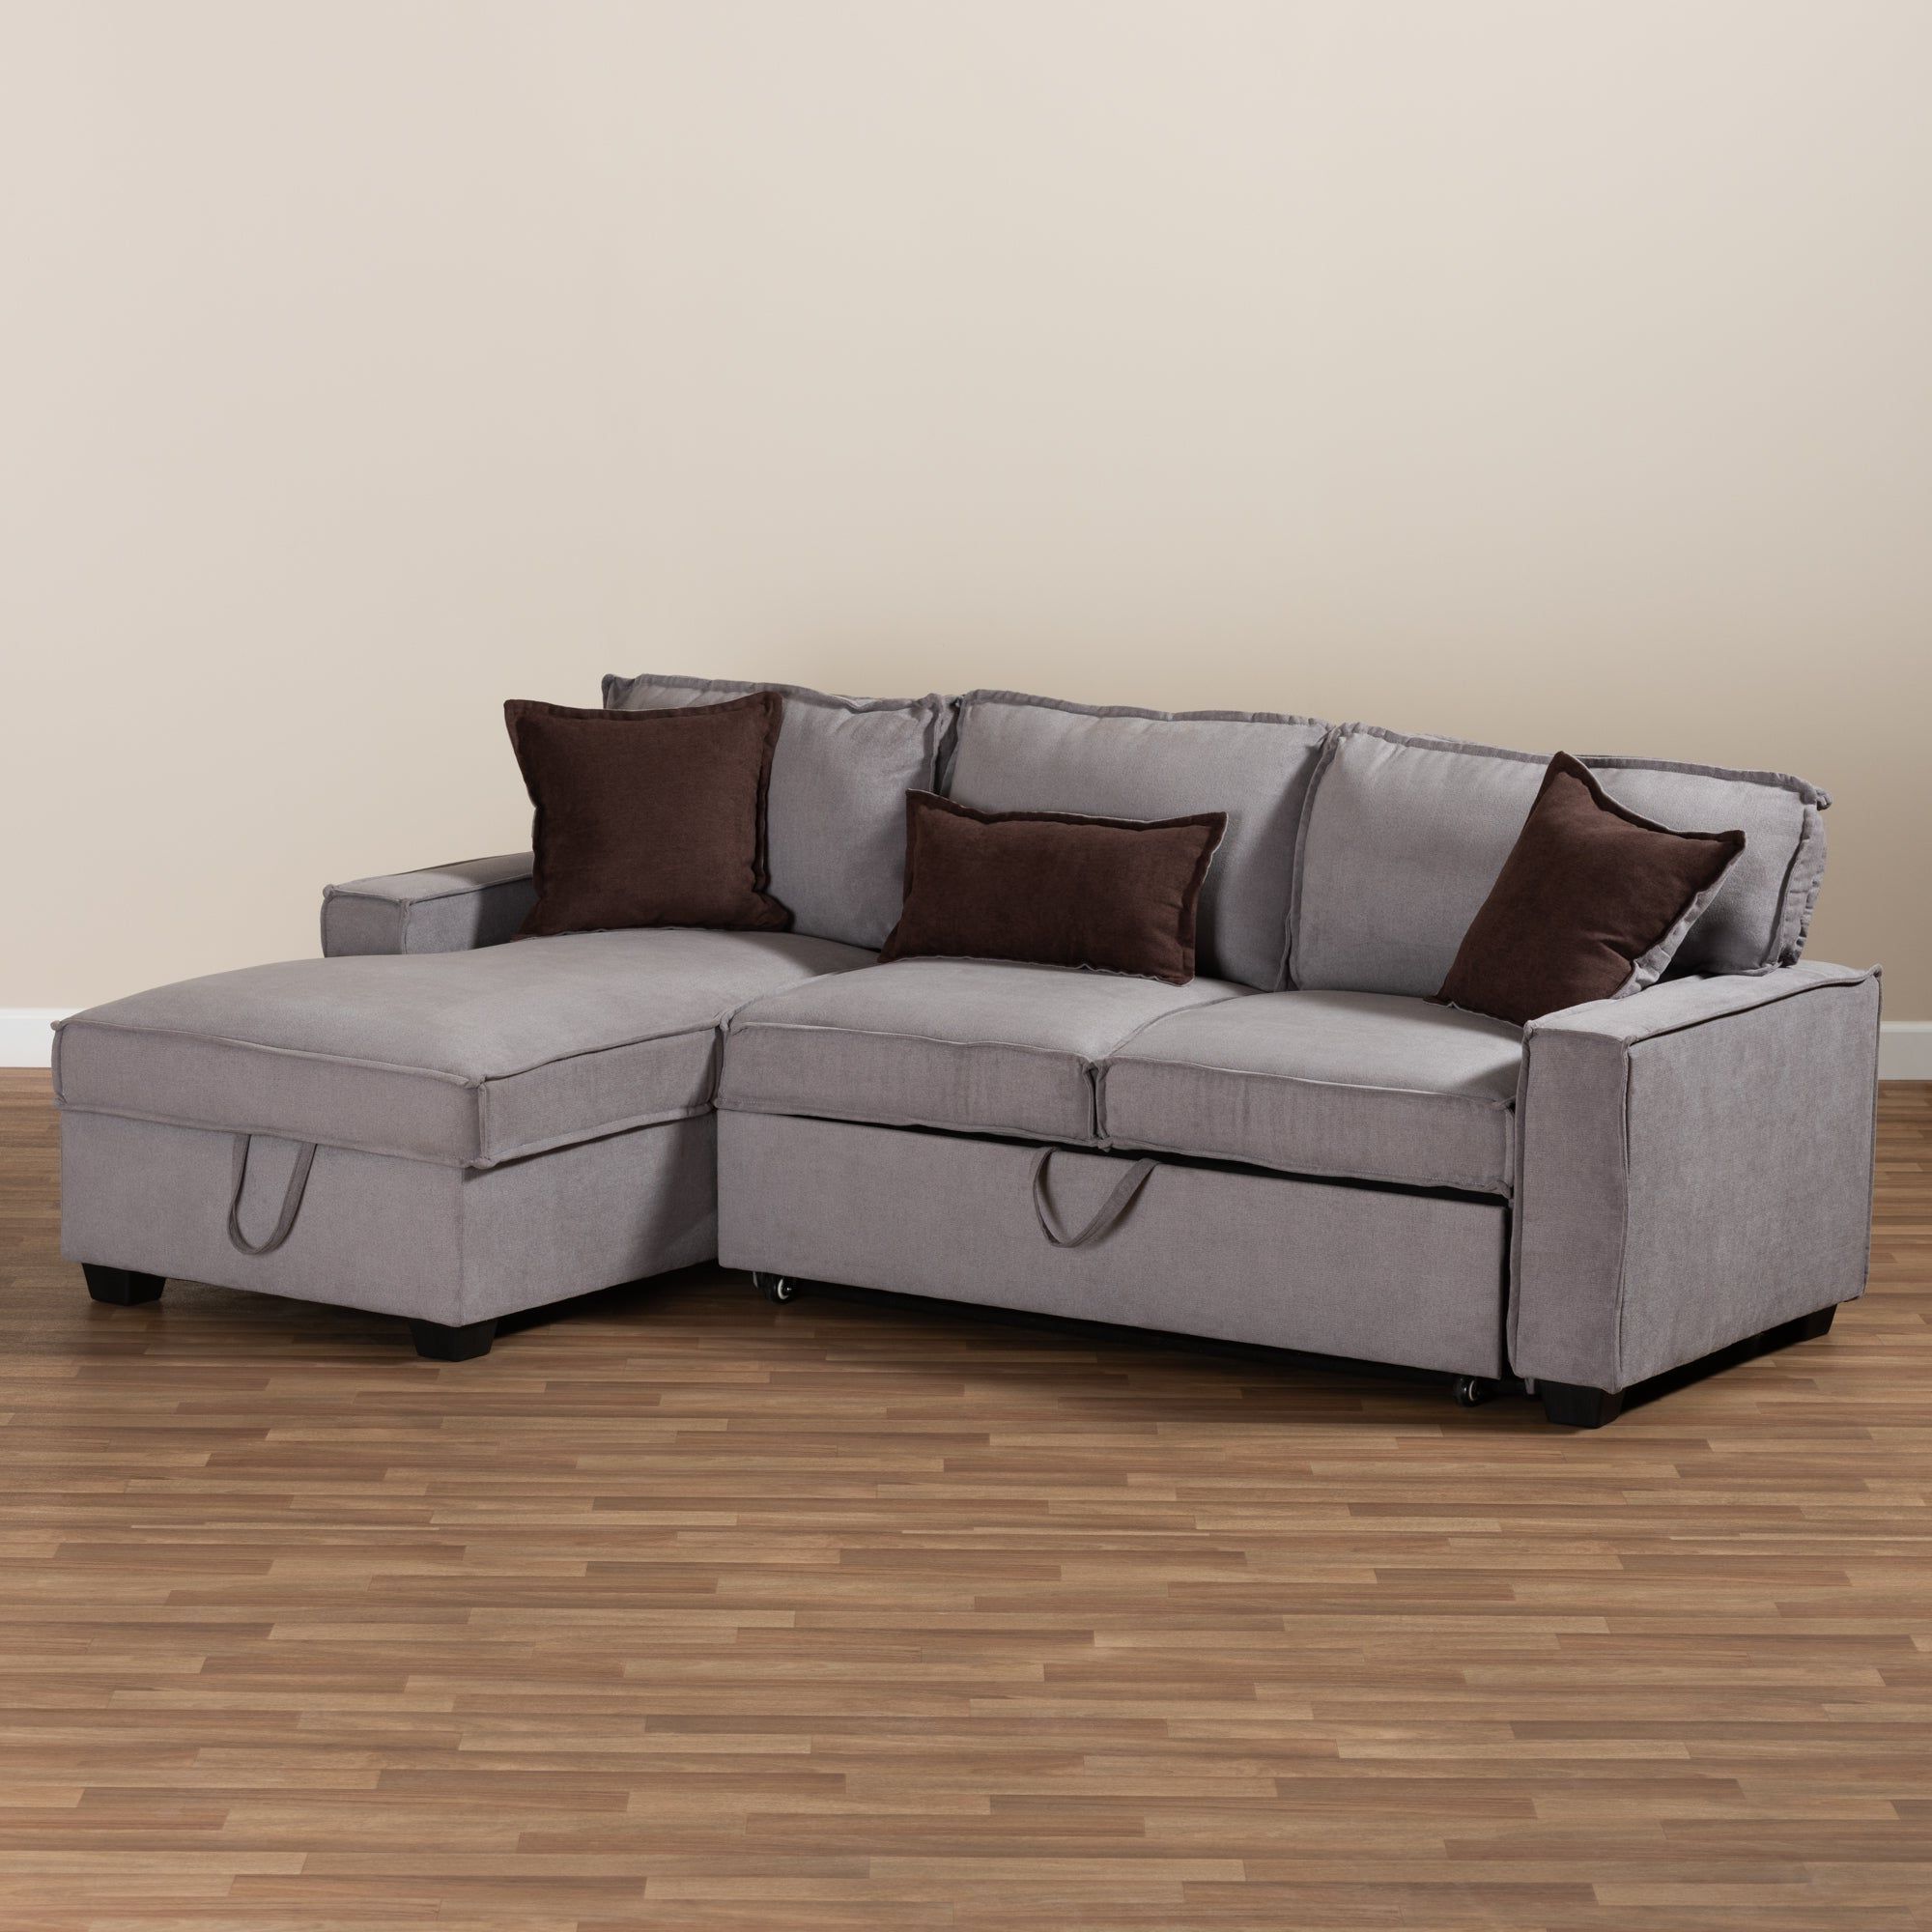 Functioning As A Sofa, Bed, And Storage All In One, The Emile Sofa Is A In Right Facing Black Sofas (View 4 of 20)